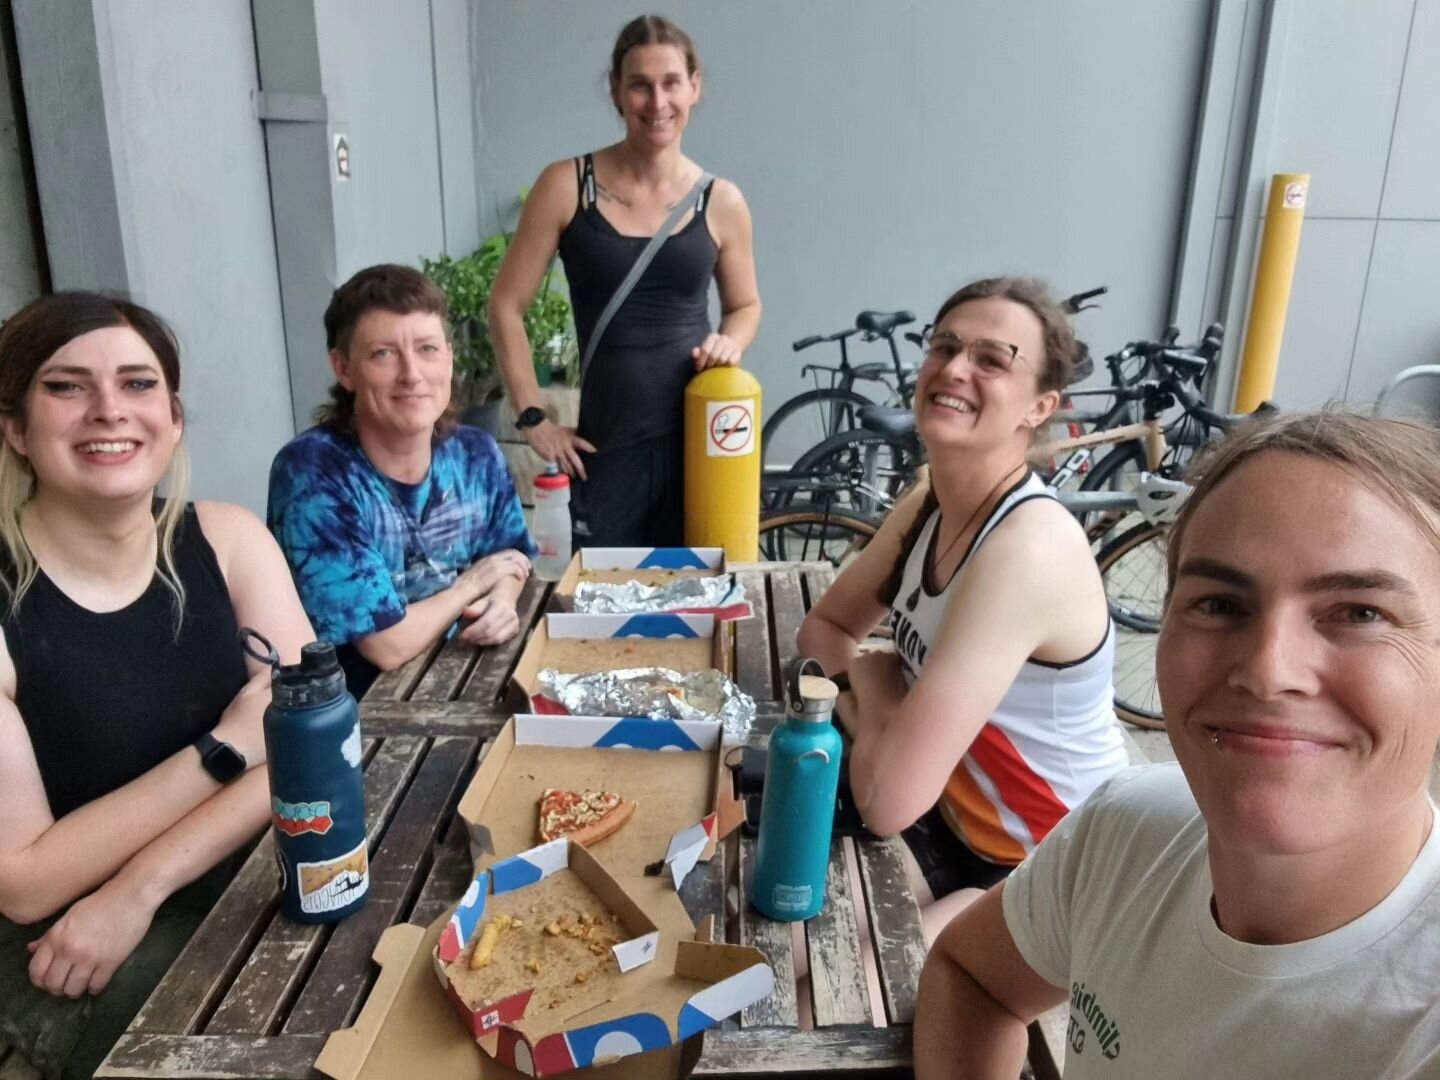 Pizza post meet-up is a vibe hey? Join us monthly for climbs and yums 🍕

Huge shout out to our champs to making it possible!